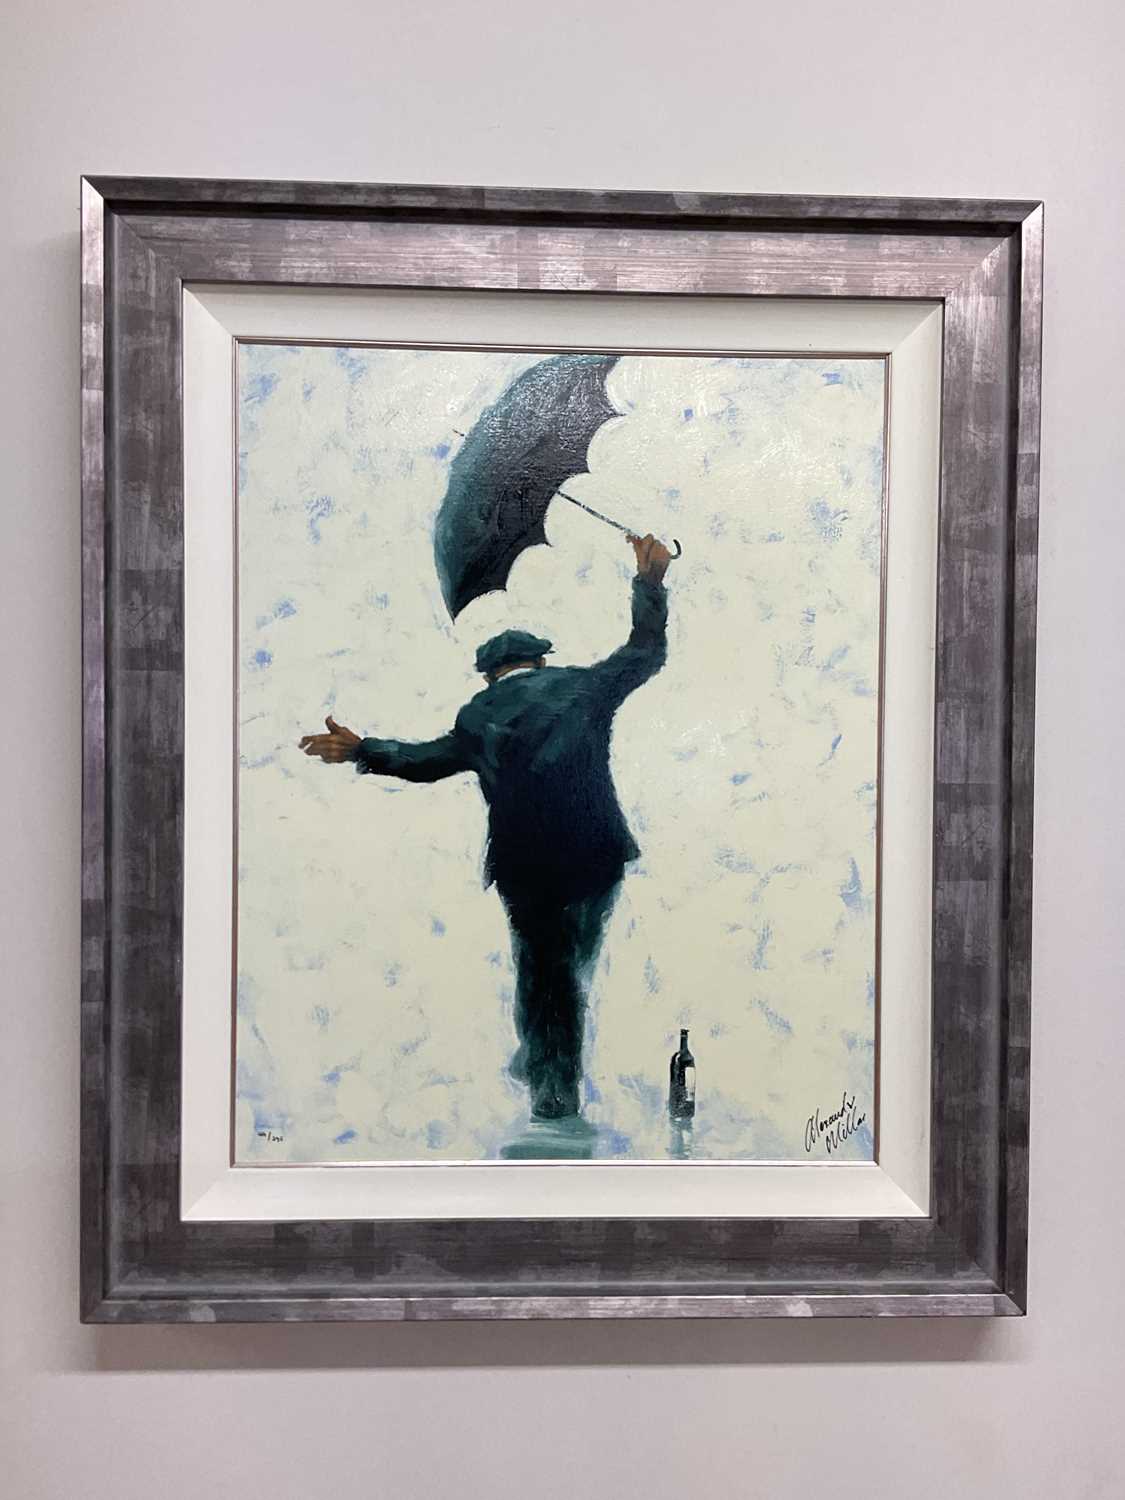 † ALEXANDER MILLAR; a signed limited edition silk screen on canvas, 'Balancing Act', numbered 44/